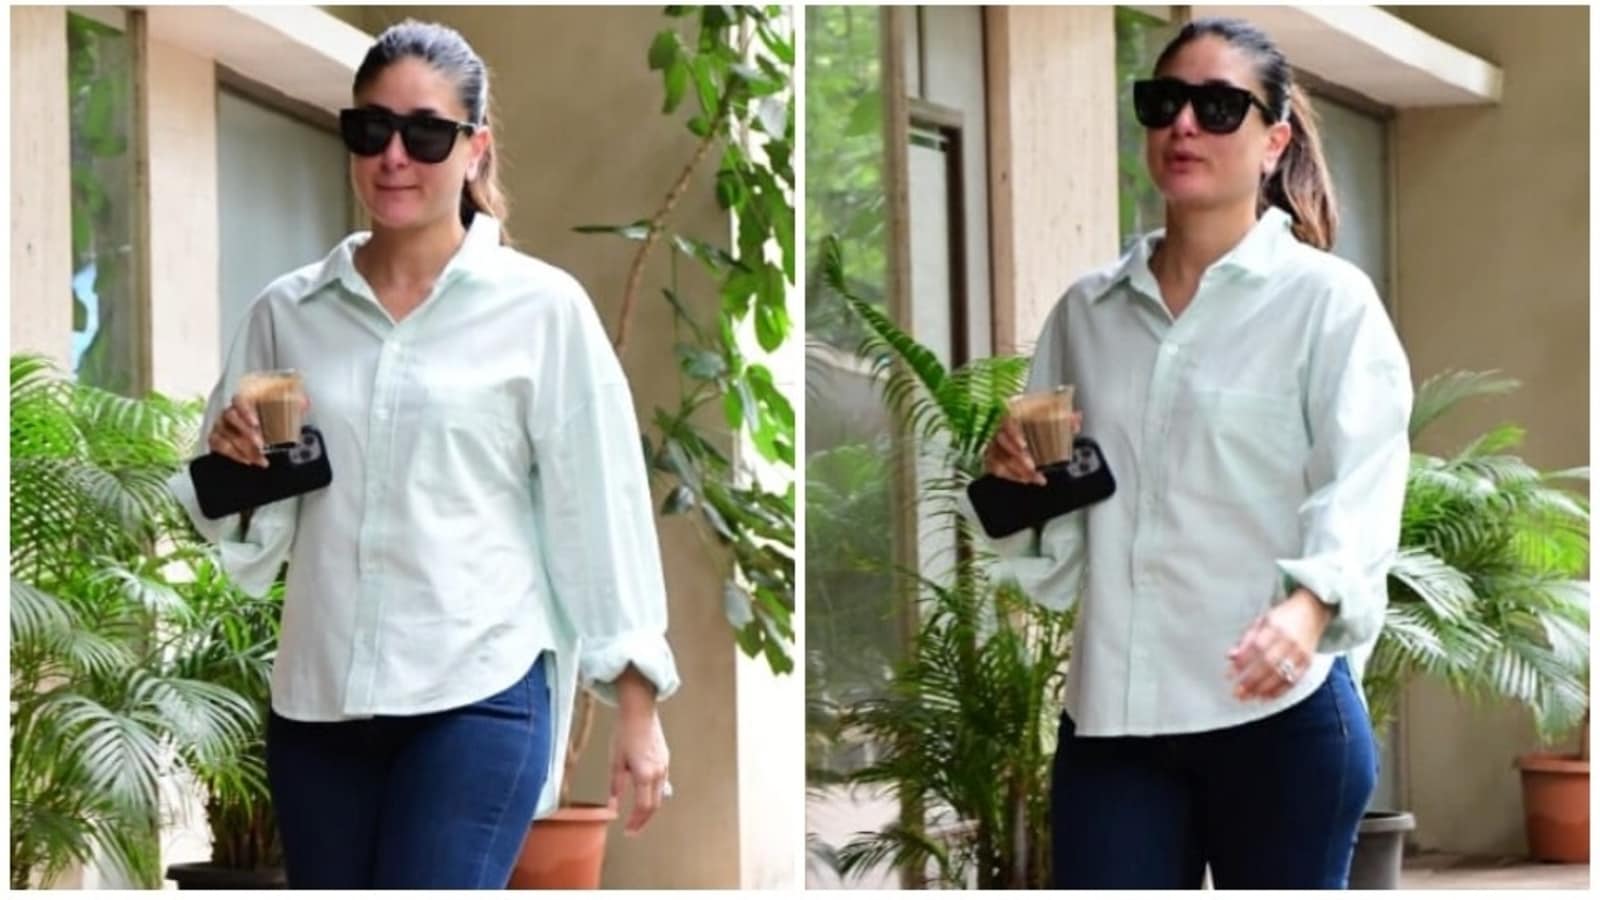 Kareima Kapur Xxx Vedeo - Kareena Kapoor steps out with cutting chai in hand as she nails everyday  dressing in shirt and jeans: See pics, video | Fashion Trends - Hindustan  Times